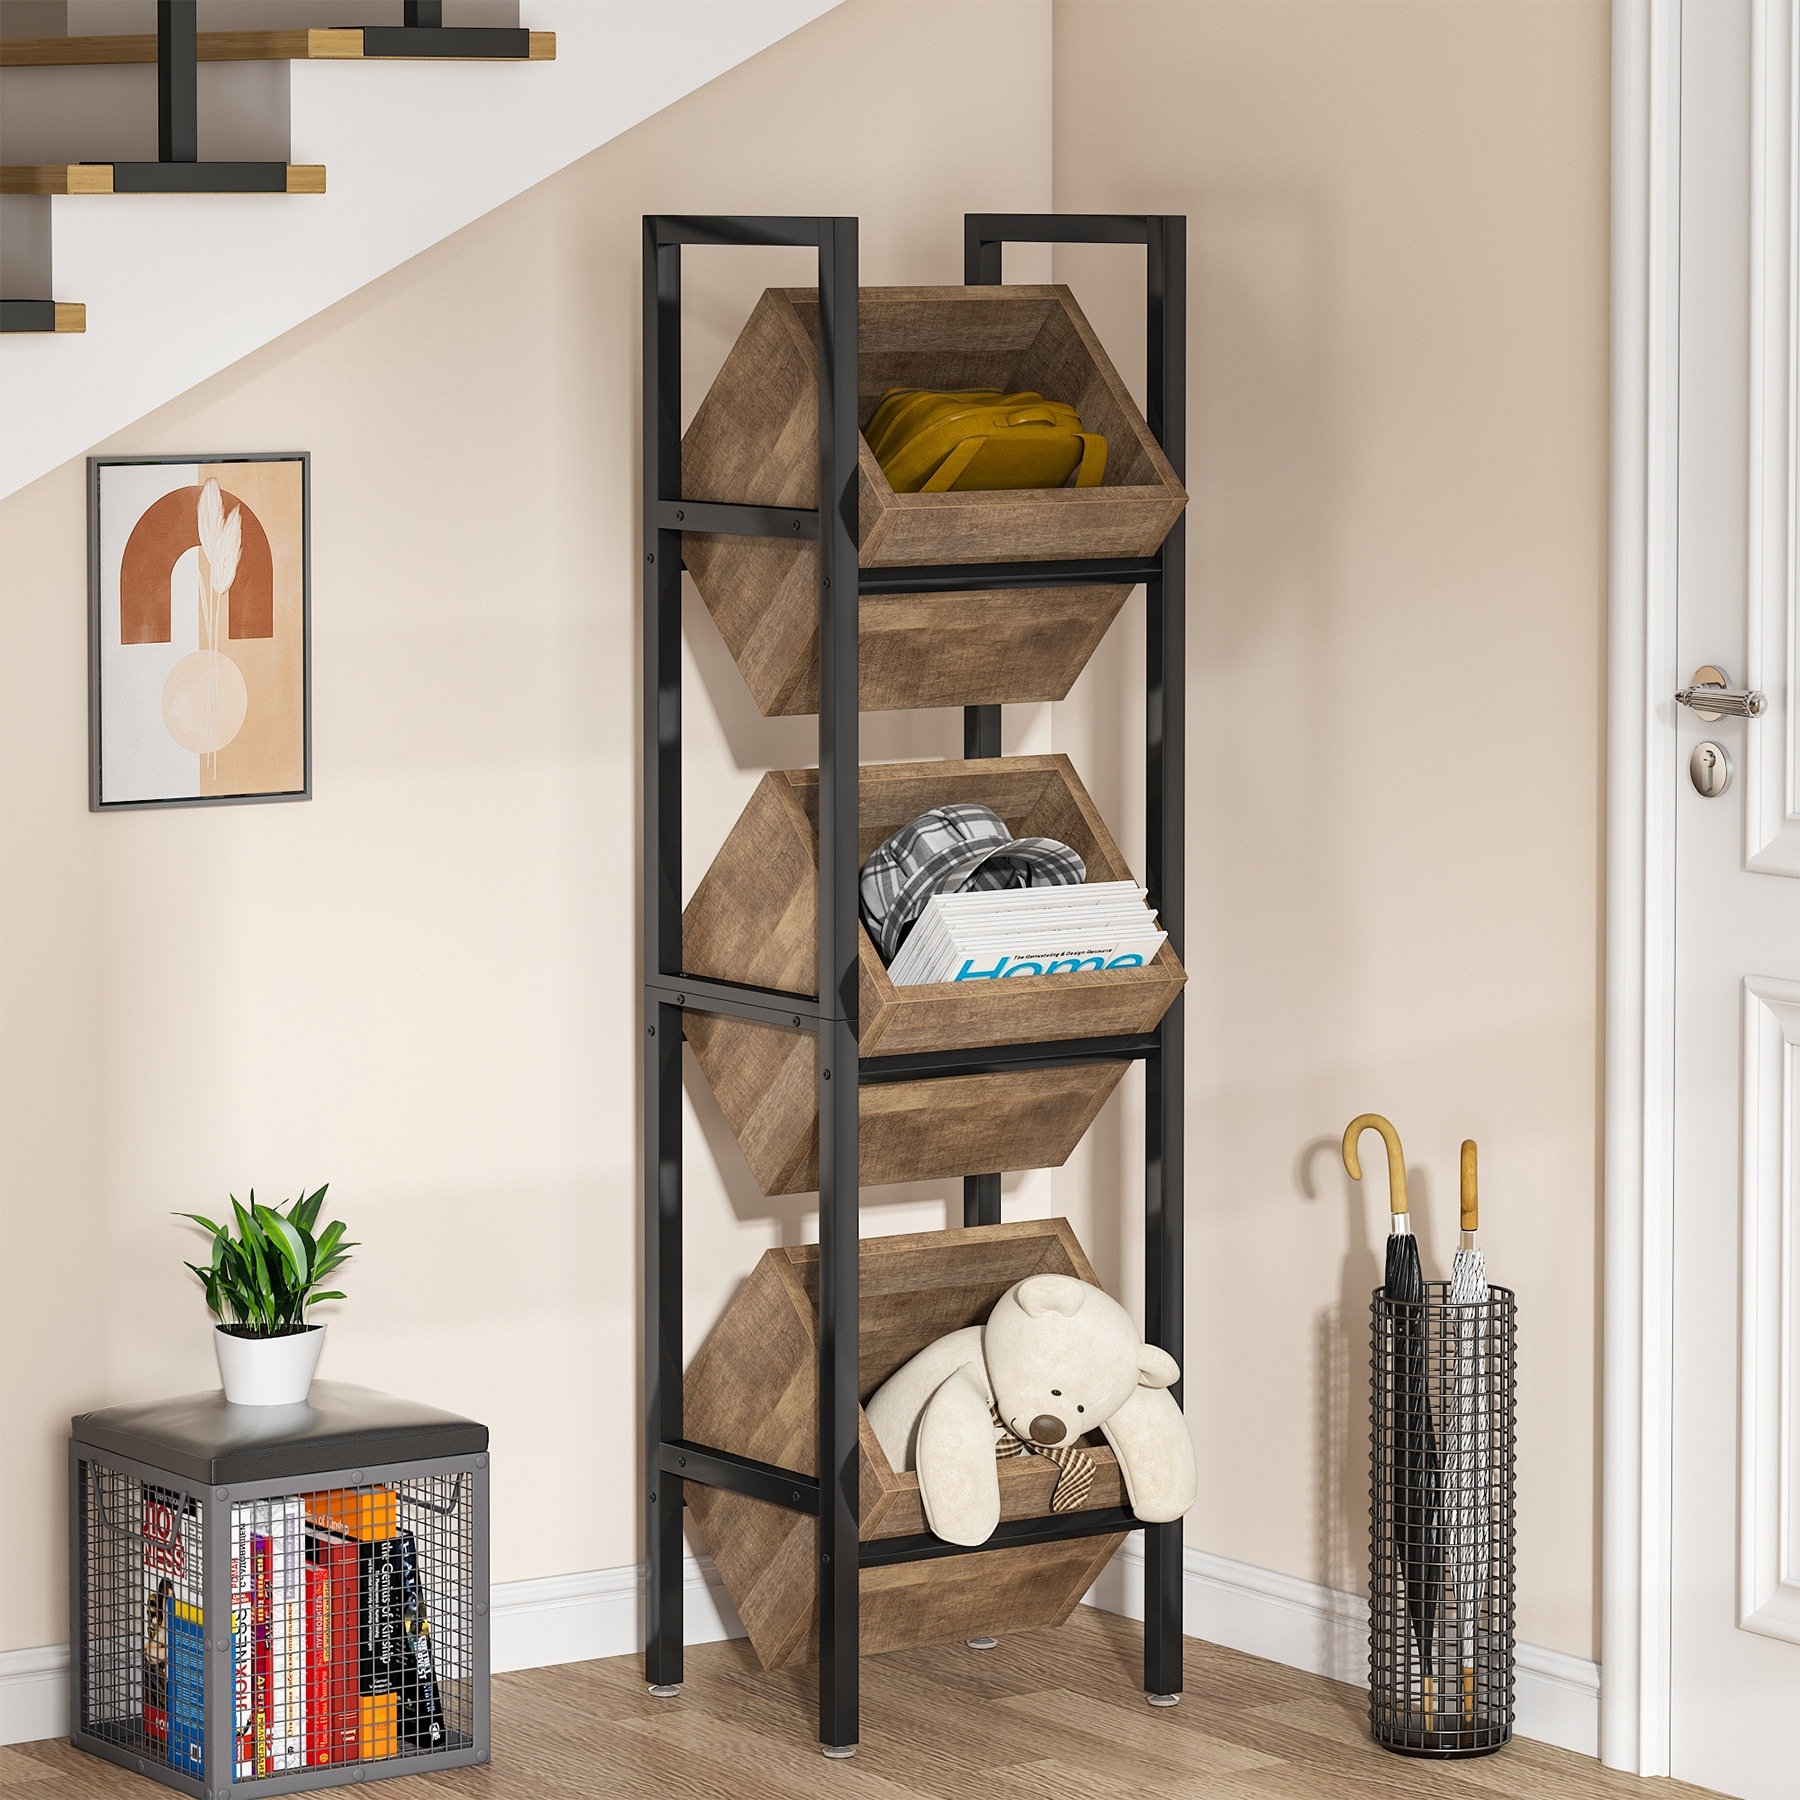 https://ak1.ostkcdn.com/images/products/is/images/direct/02121a03a3c92b67282bb0ba7a7c6ef4f630aa26/Rustic-Vertical-Standing-Basket-Storage-Tower-for-Kitchen-Bathroom-Living-Room.jpg